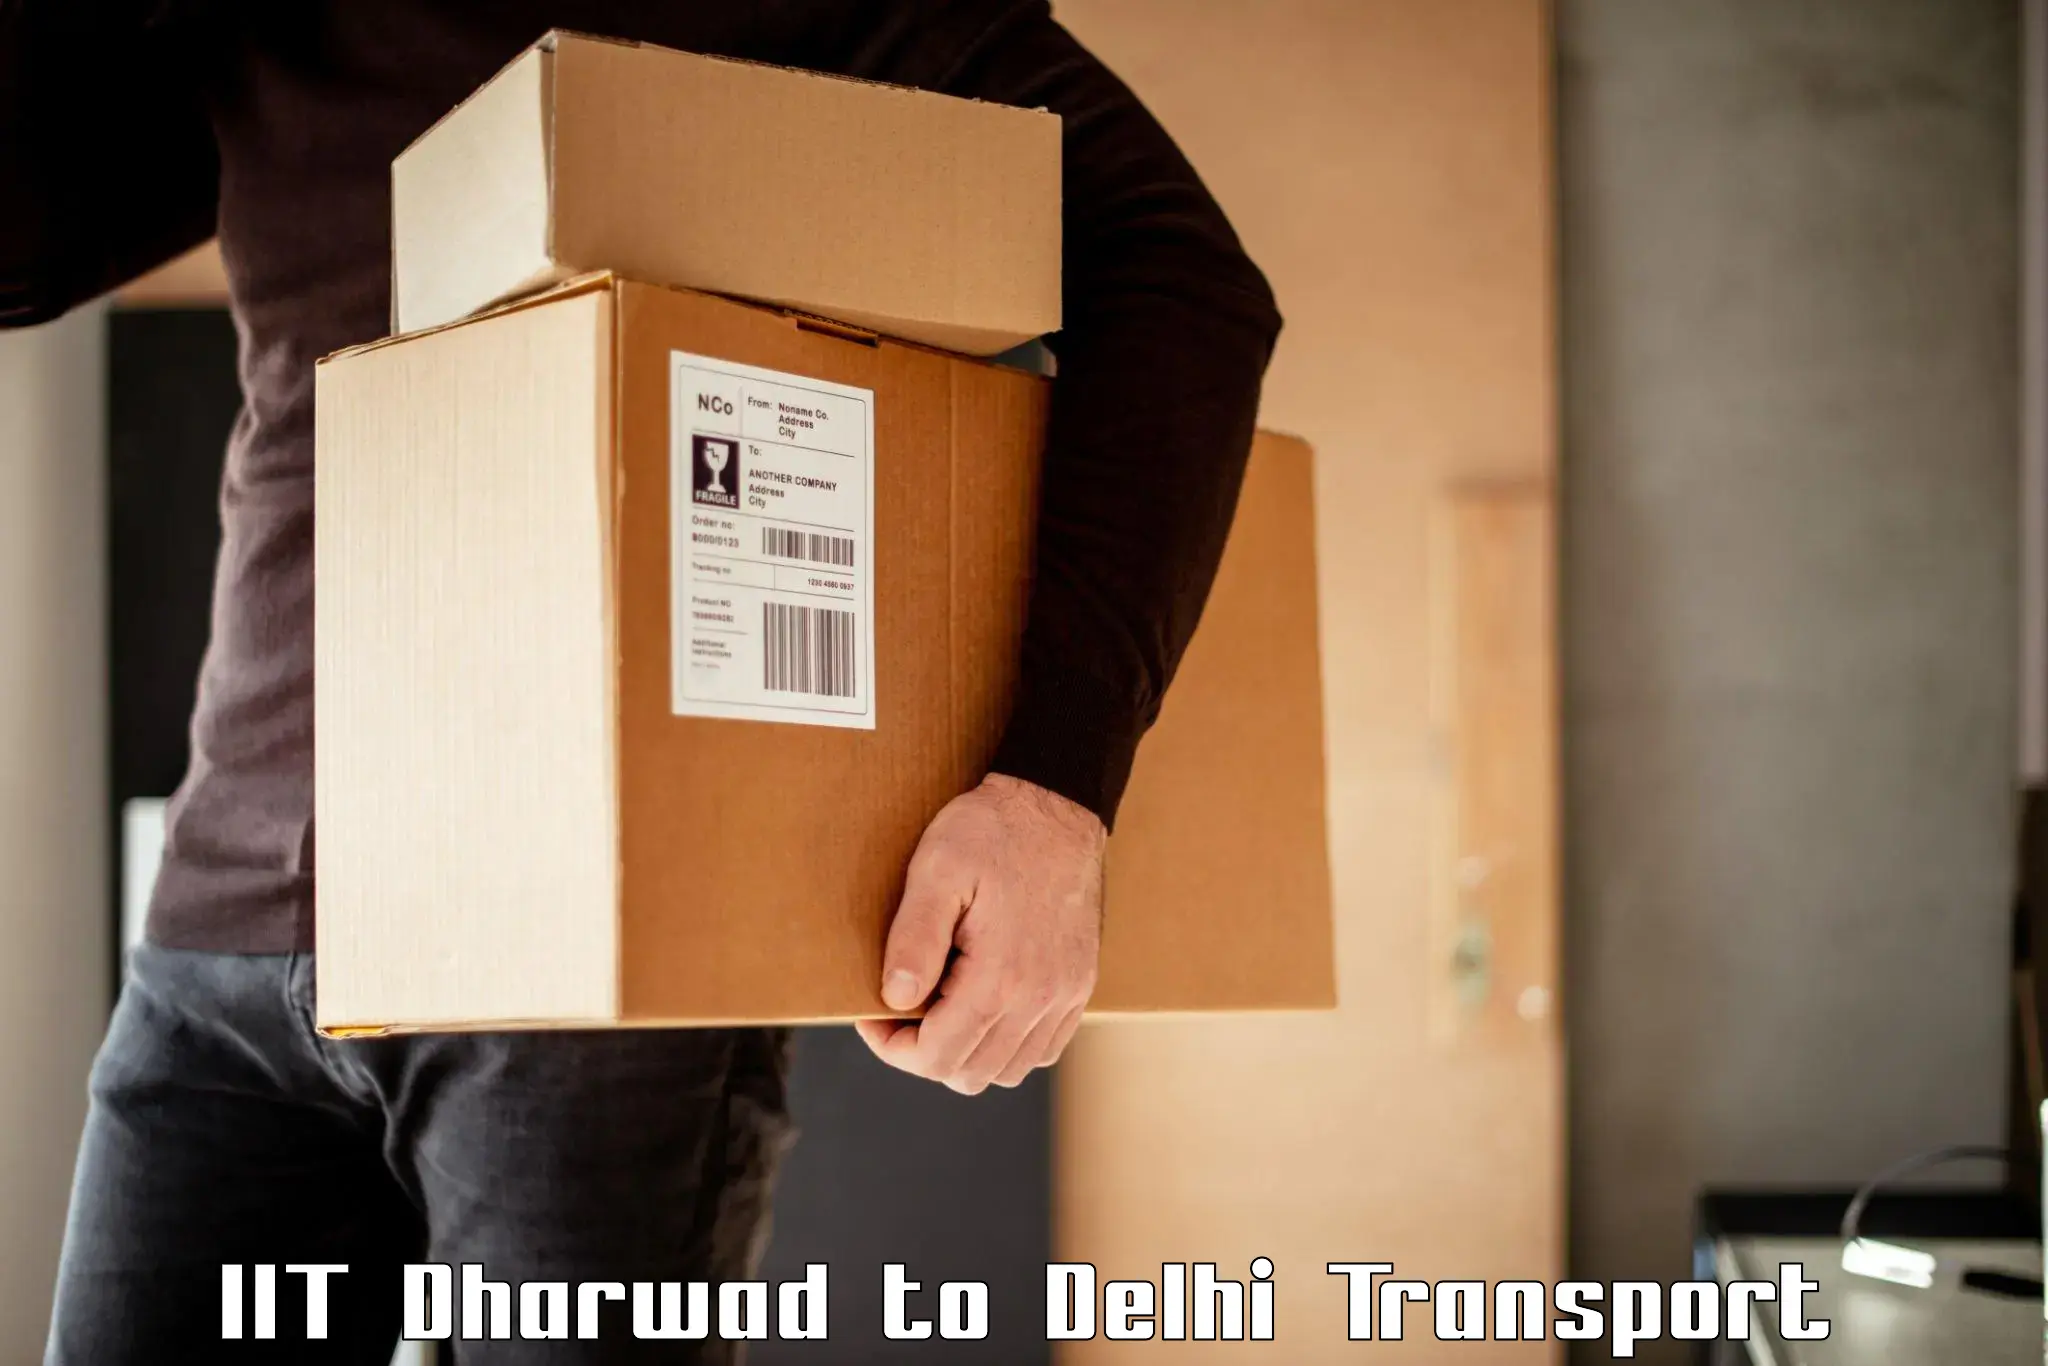 Cargo train transport services IIT Dharwad to NCR